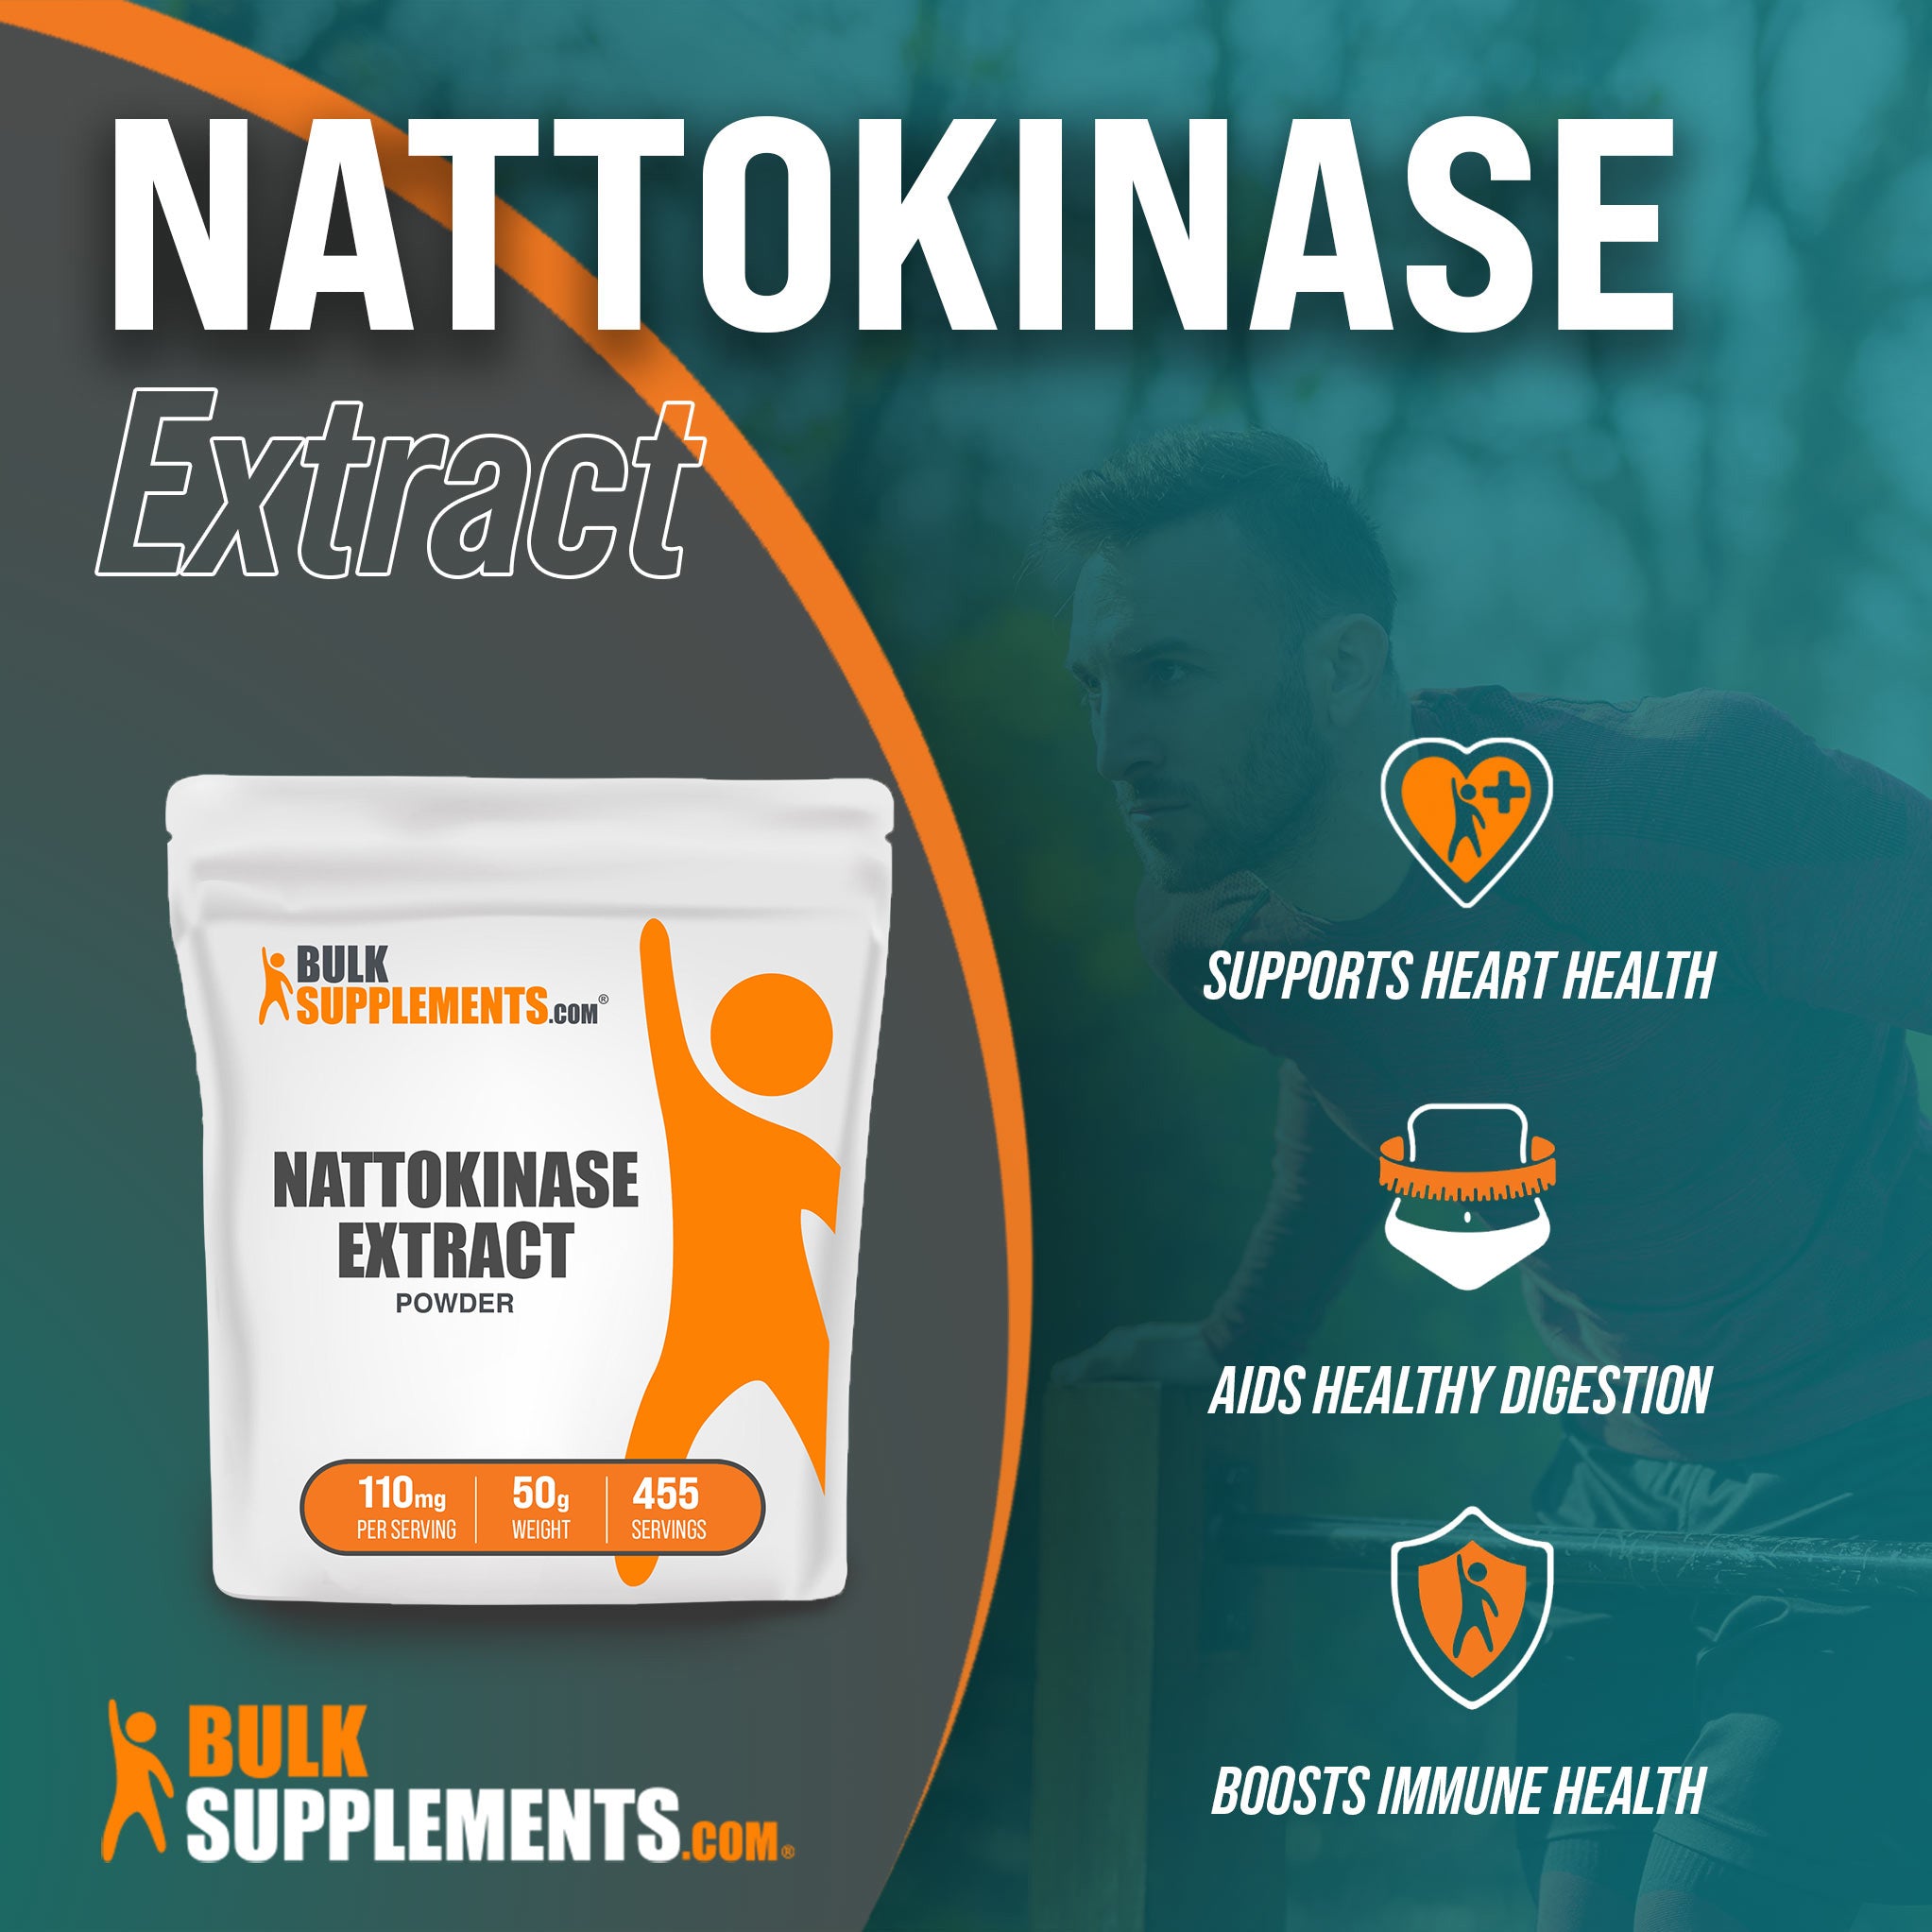 Benefits of Nattokinase Extract: supports heart health, aids healthy digestion, boosts immune health